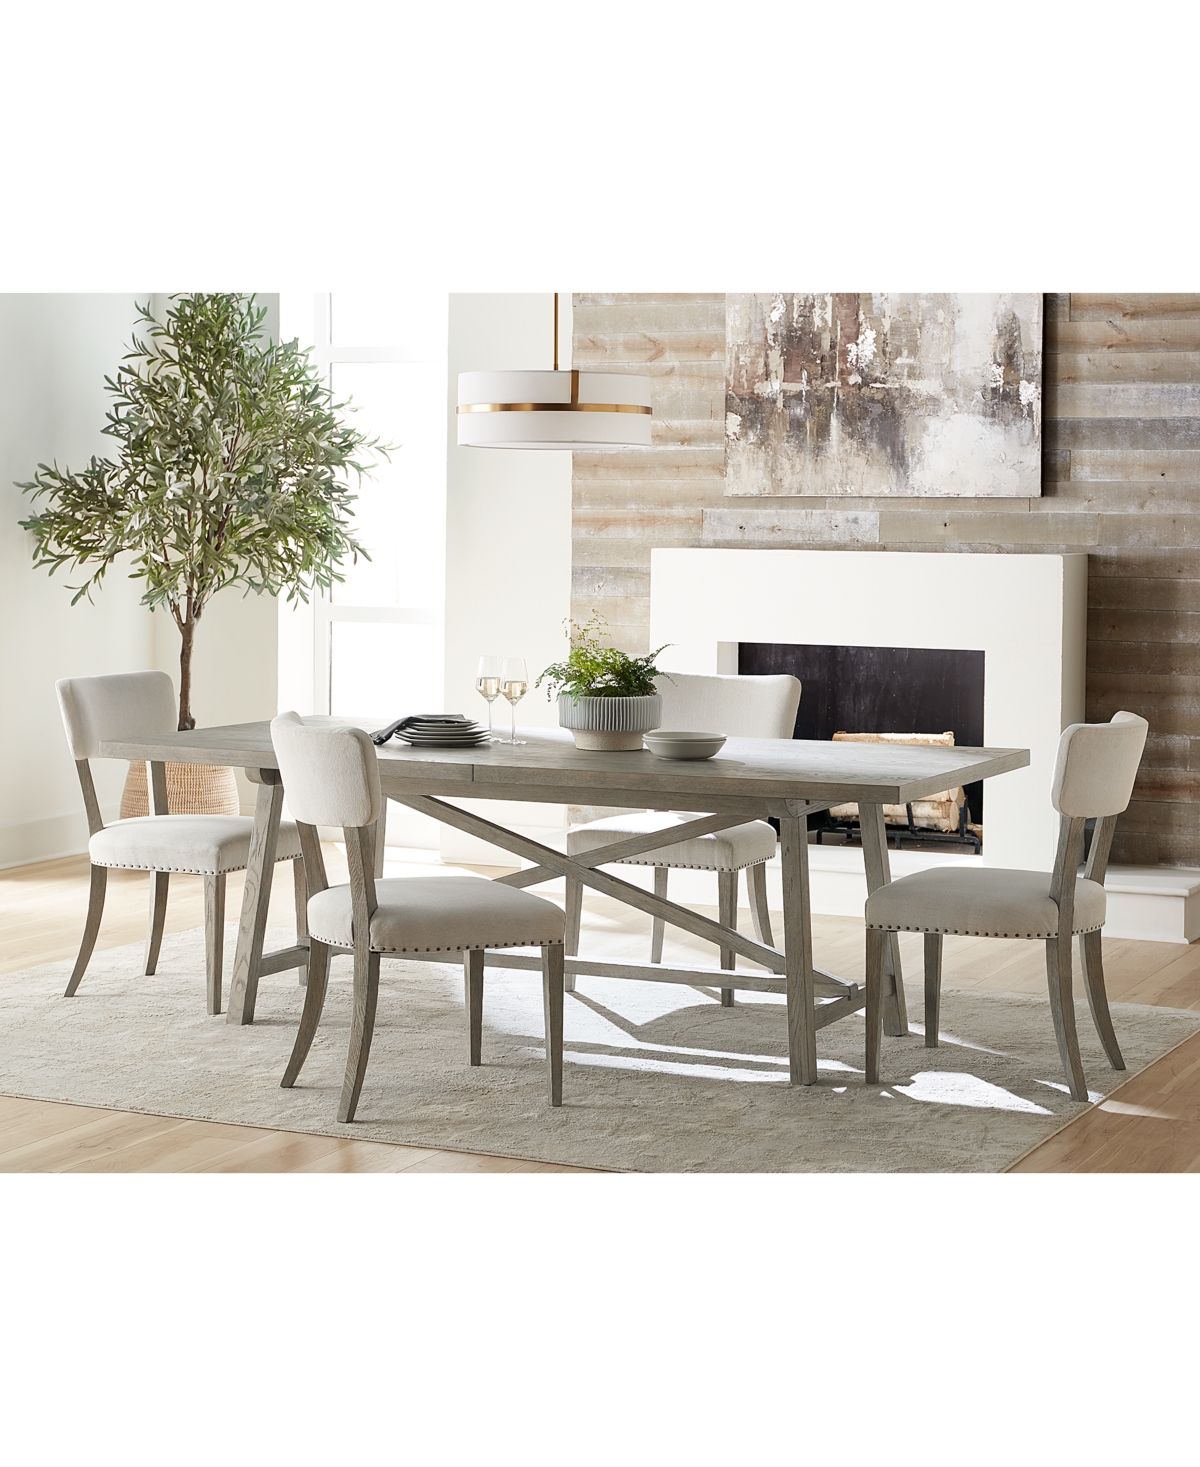 Albion 5-pc. Dining Set (Table and 4 Side Chairs)